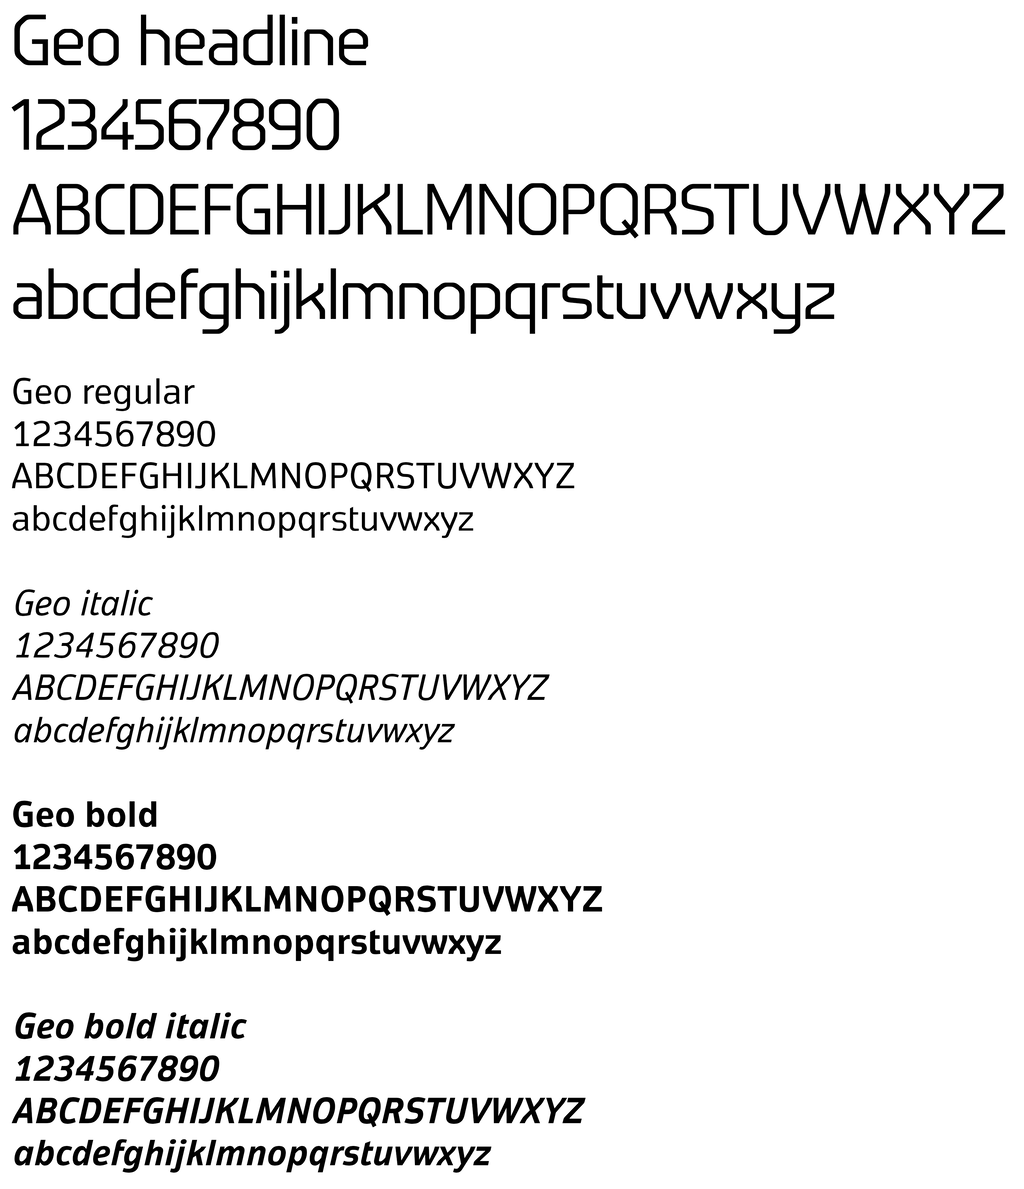 Examples of the Geo typeface in a variety of sizes and weights.